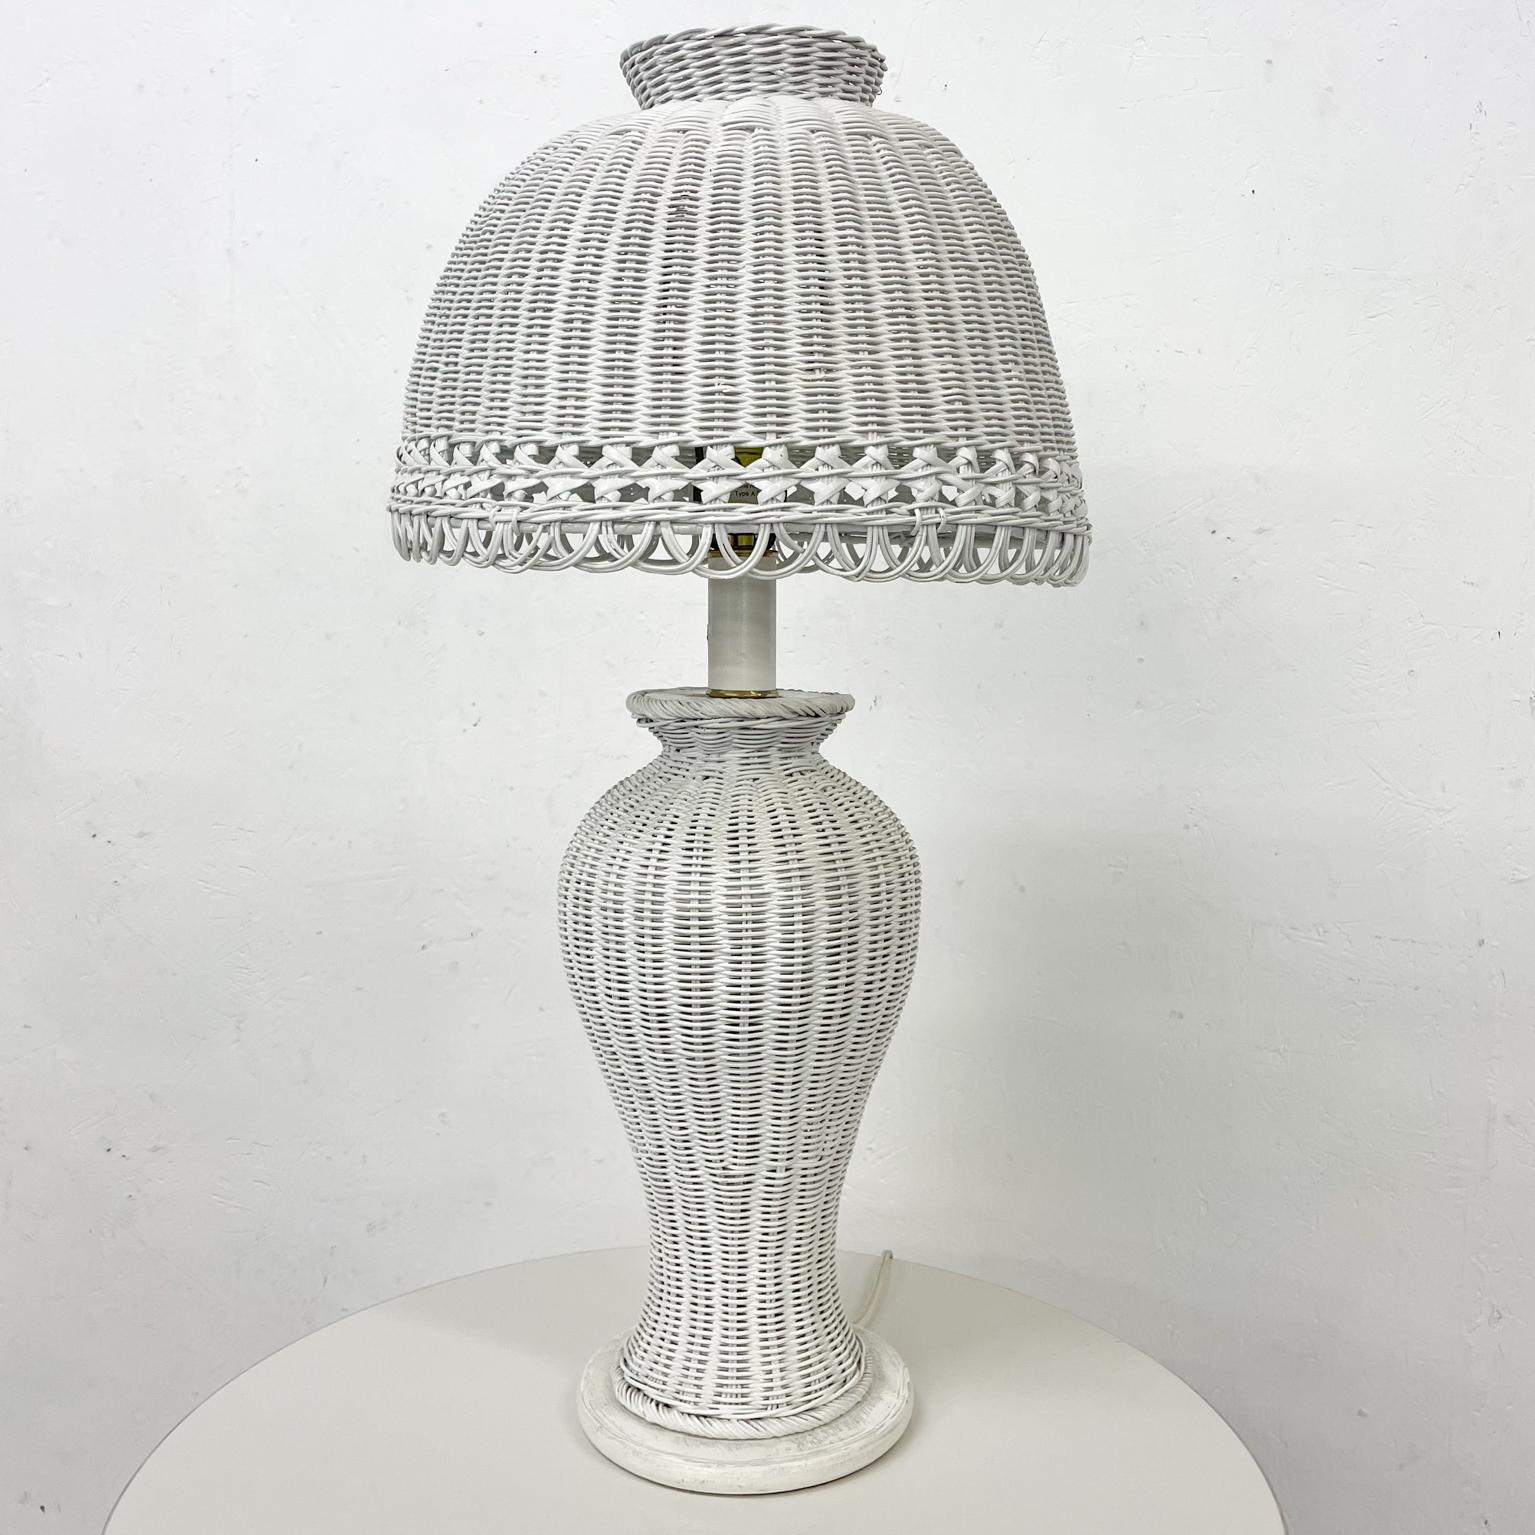 Wicker lamp
1970s pretty vintage white wicker sculptural lamp scalloped dome shade
Farmhouse Beach cottage table lamp
Measures: 29.5 tall x 14.5 diameter
Preowned original unrestored vintage condition.
See images provided.



